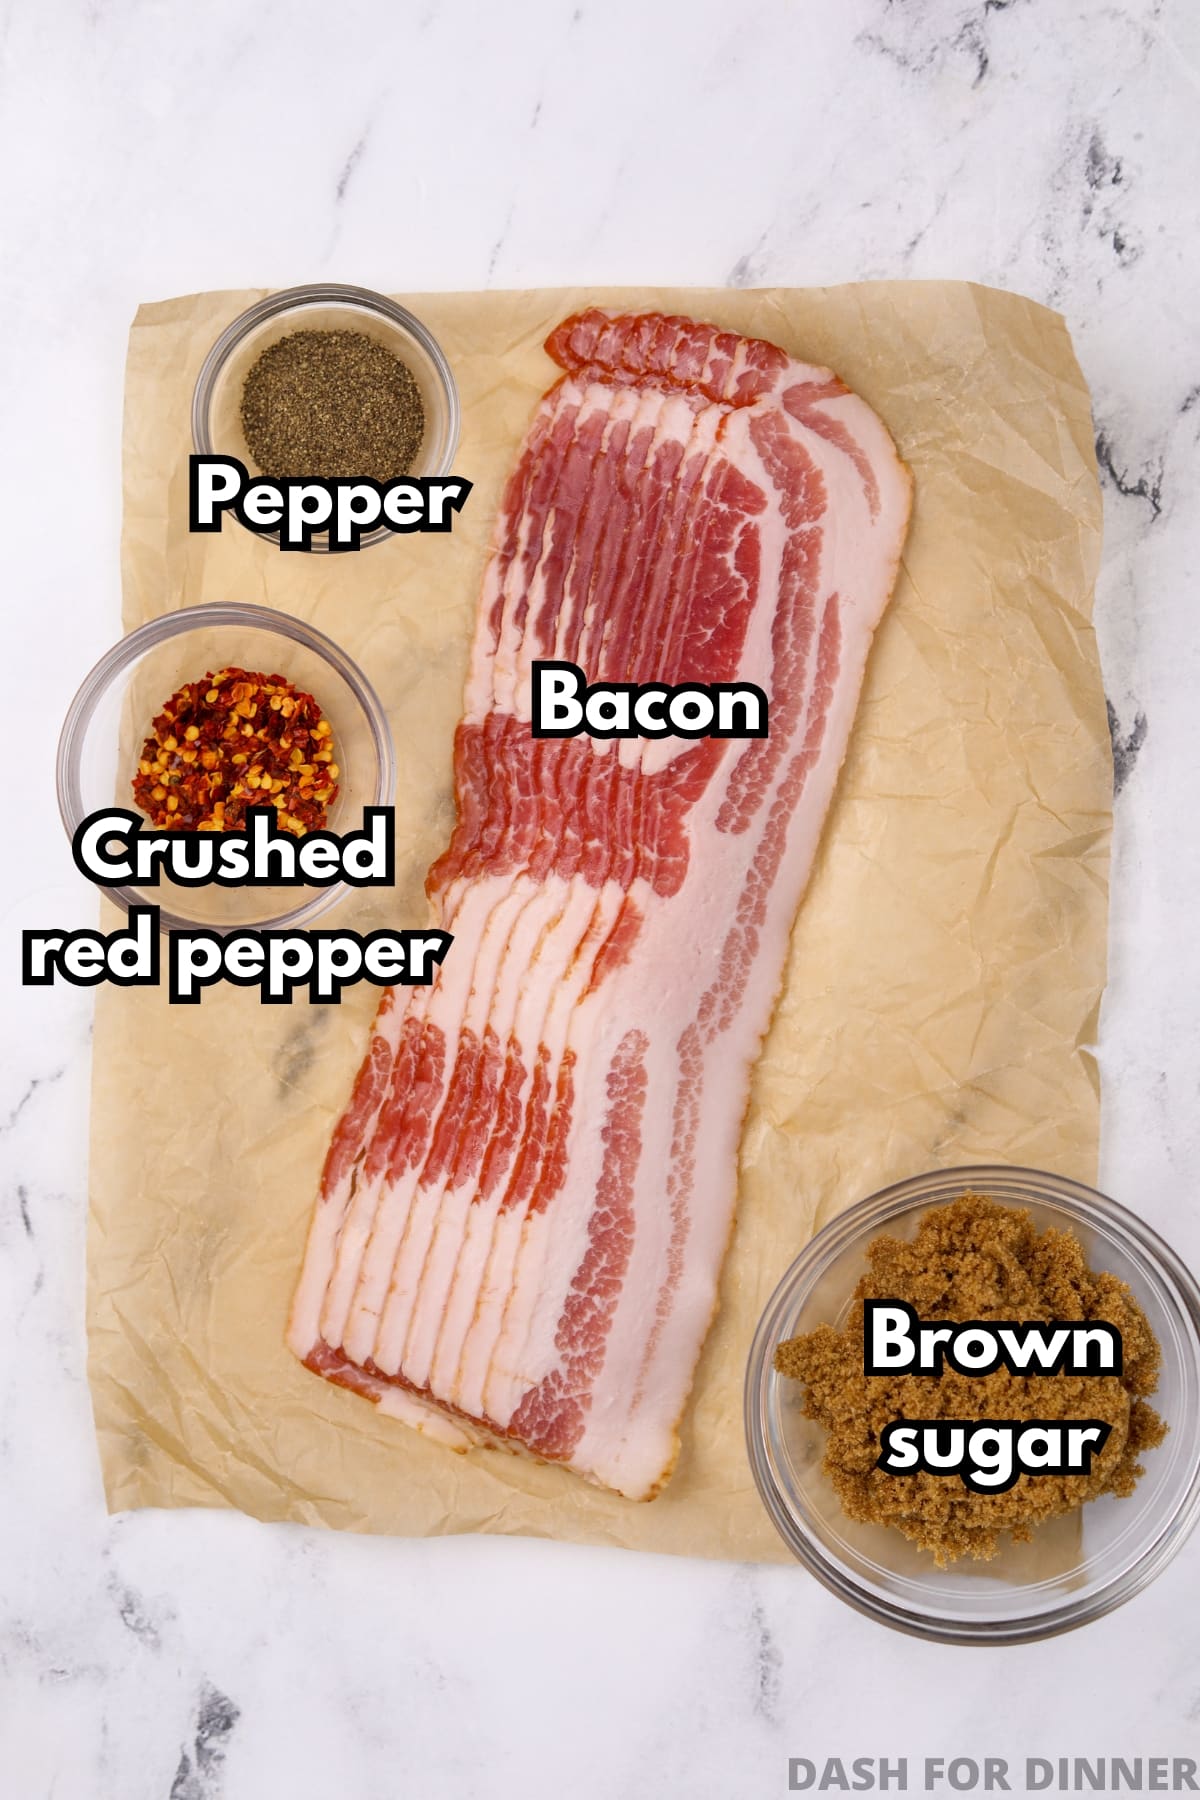 The ingredients needed to make spicy candied bacon: bacon, crushed red pepper, brown sugar, and black pepper.